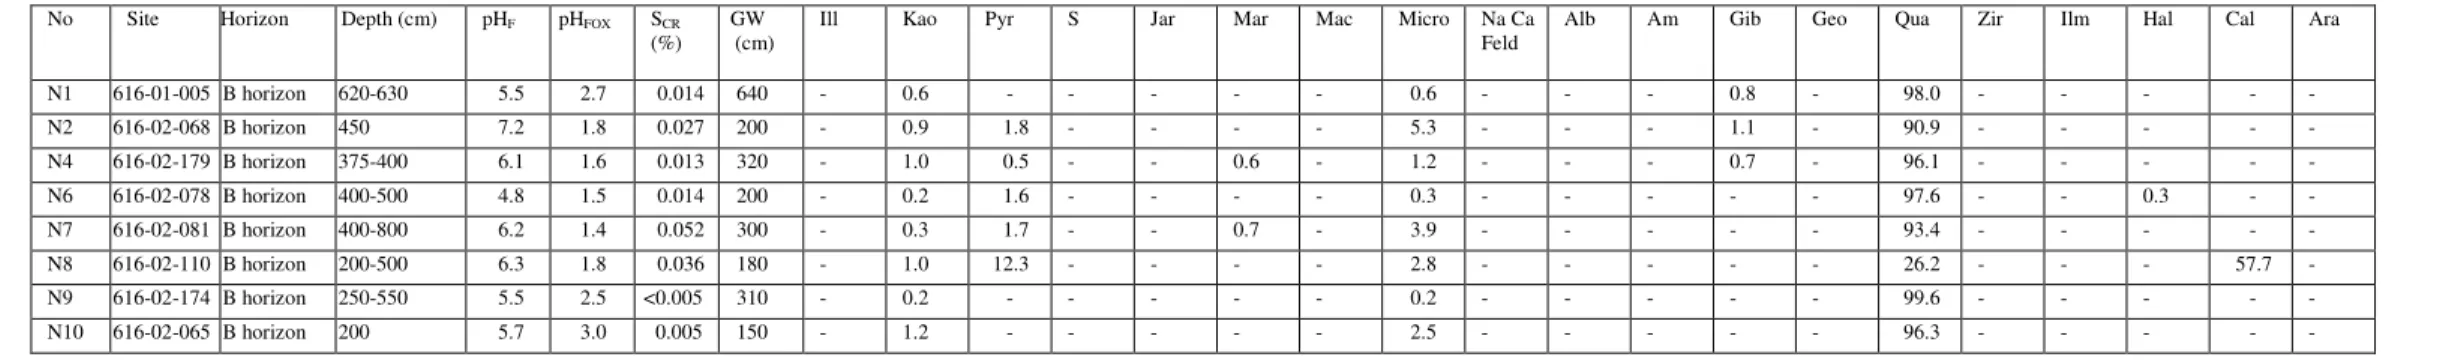 Table 2 (Cont.)  Mineralogical composition (semi quantitative %) of the fine fraction of soil samples (based on synchrotron XRD) * 